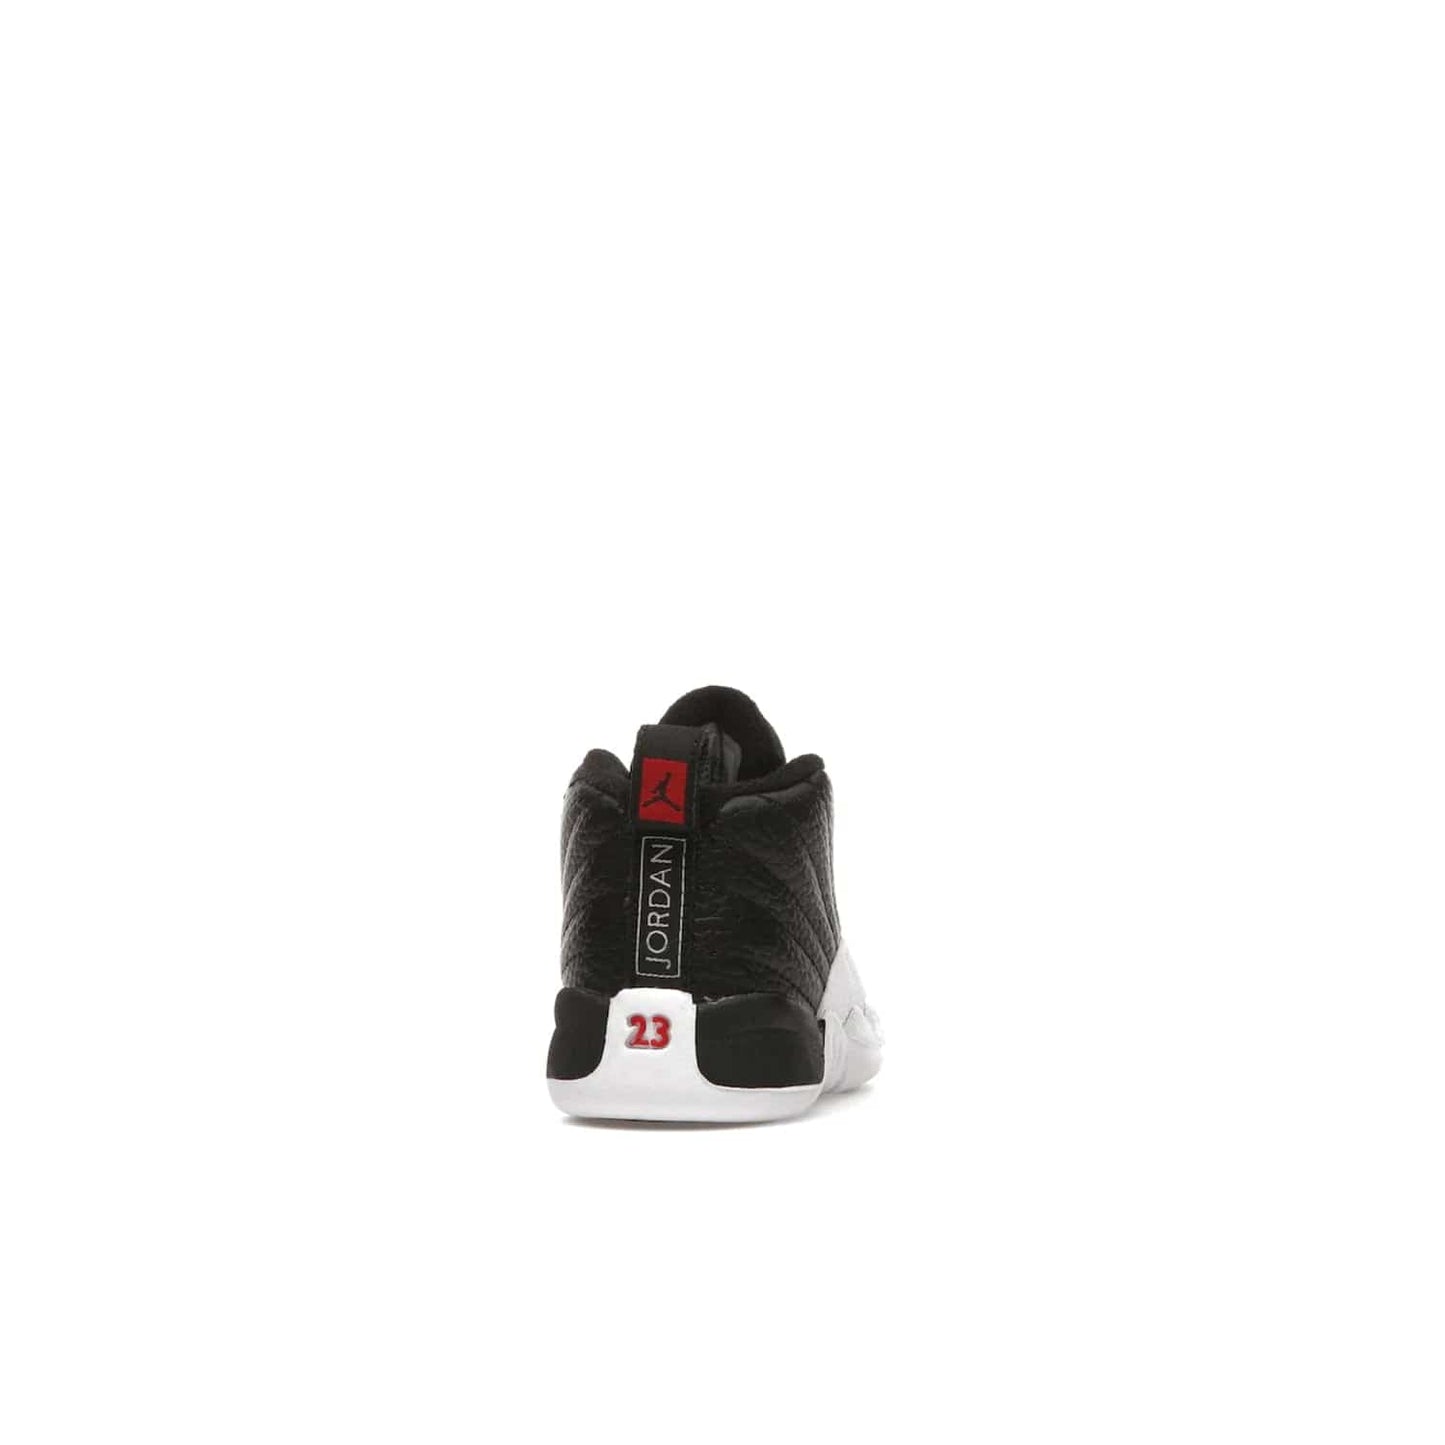 Jordan 12 Retro Playoffs (2022) (TD) - Image 29 - Only at www.BallersClubKickz.com - Stay stylish with the Air Jordan 12 Retro Playoffs 2022 (TD) toddler shoe. All-black upper with red and white accents plus subtle gold details. Bright white midsole and sole. Perfect for any outing or special event.